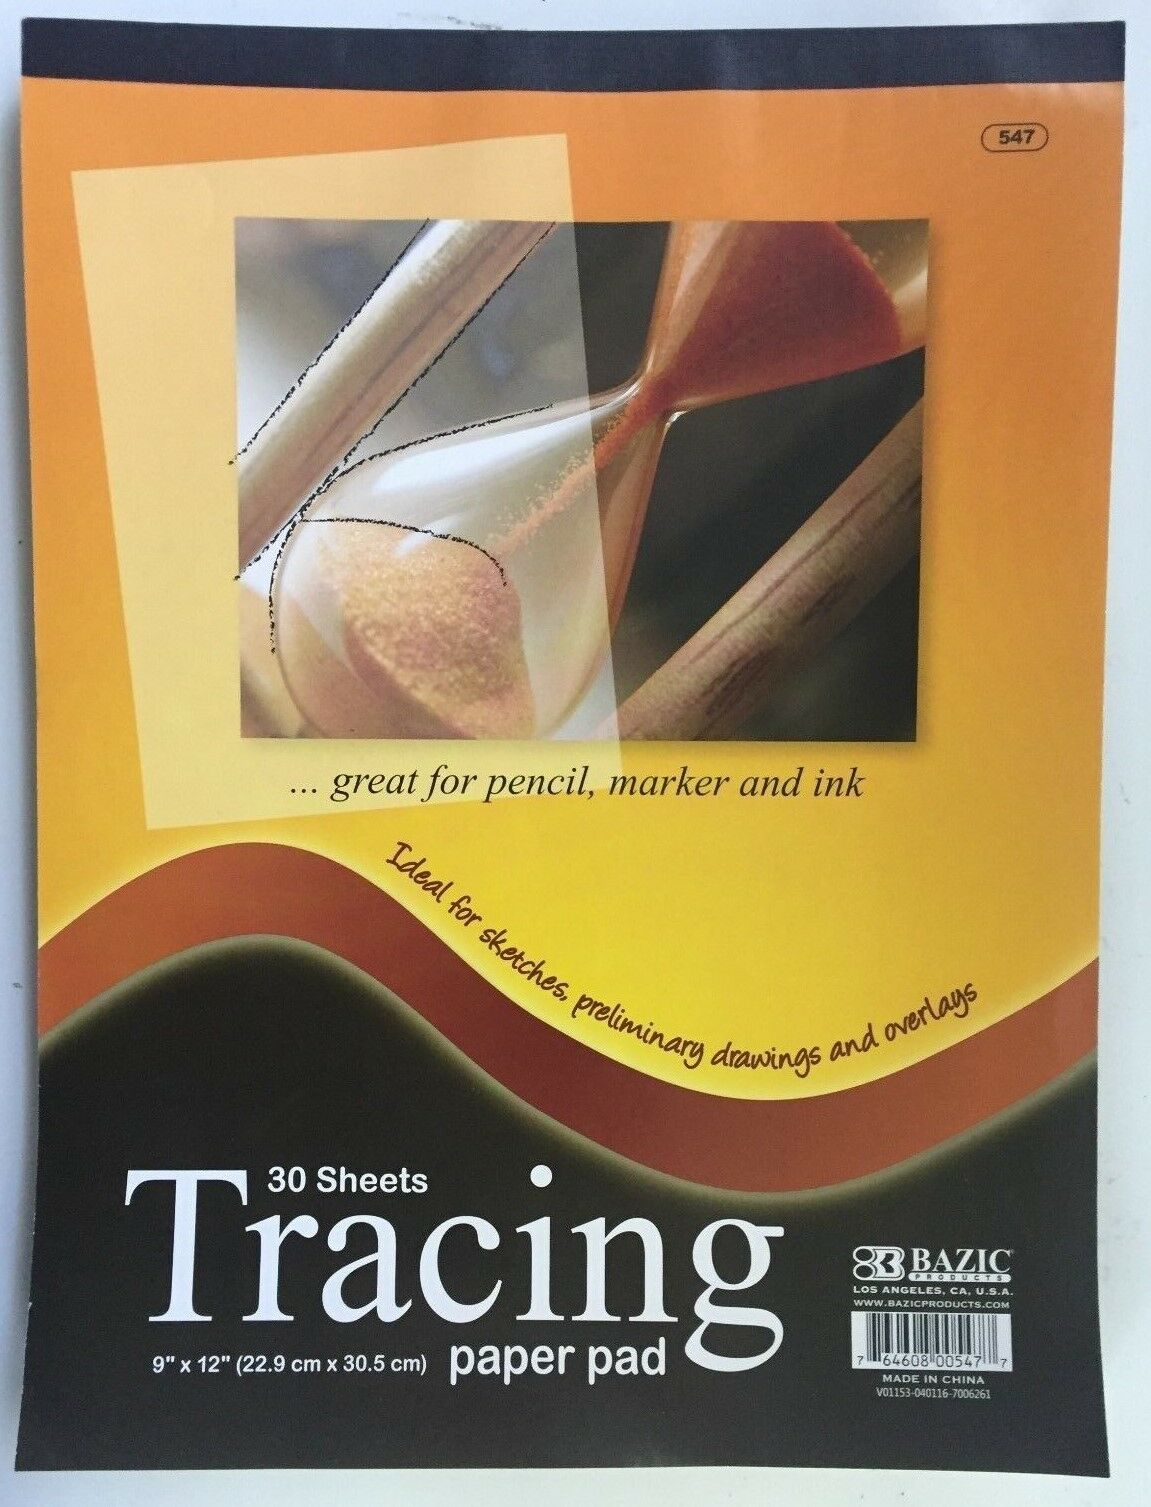 Tracing 30 Sheet 9" X 12" Premium Quality Paper Pad Sketches Book Preliminary